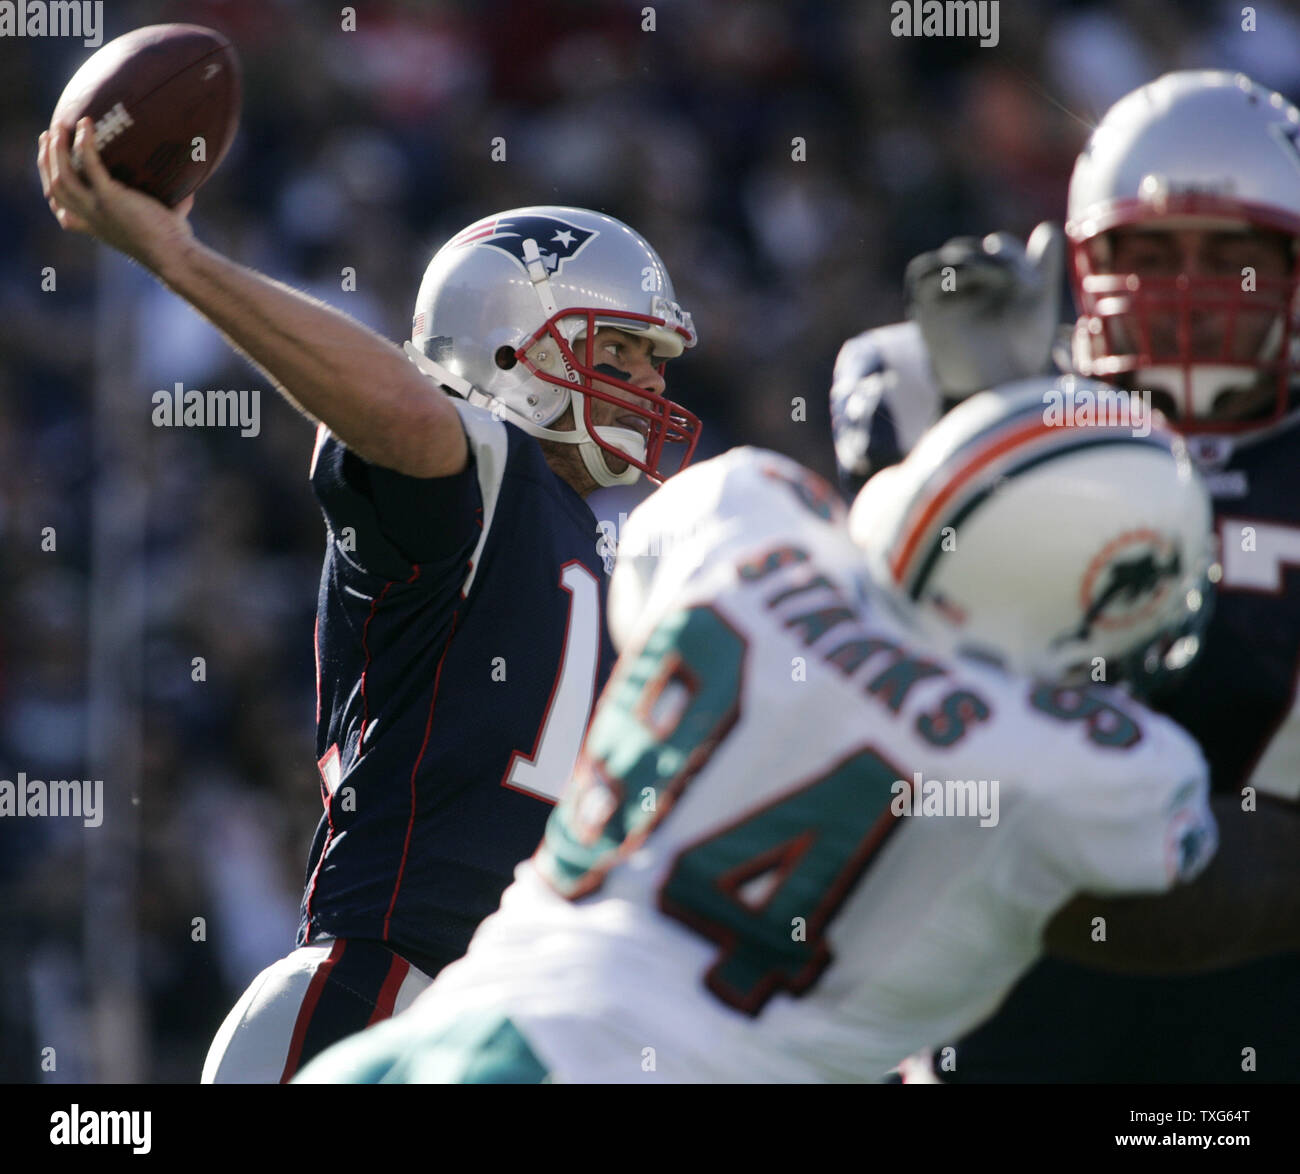 New England Patriots quarterback Tom Brady (12) throws in the first quarter against the Miami Dolphins at Gillette Stadium in Foxboro, Massachusetts on November 8, 2009.    UPI/Matthew Healey Stock Photo